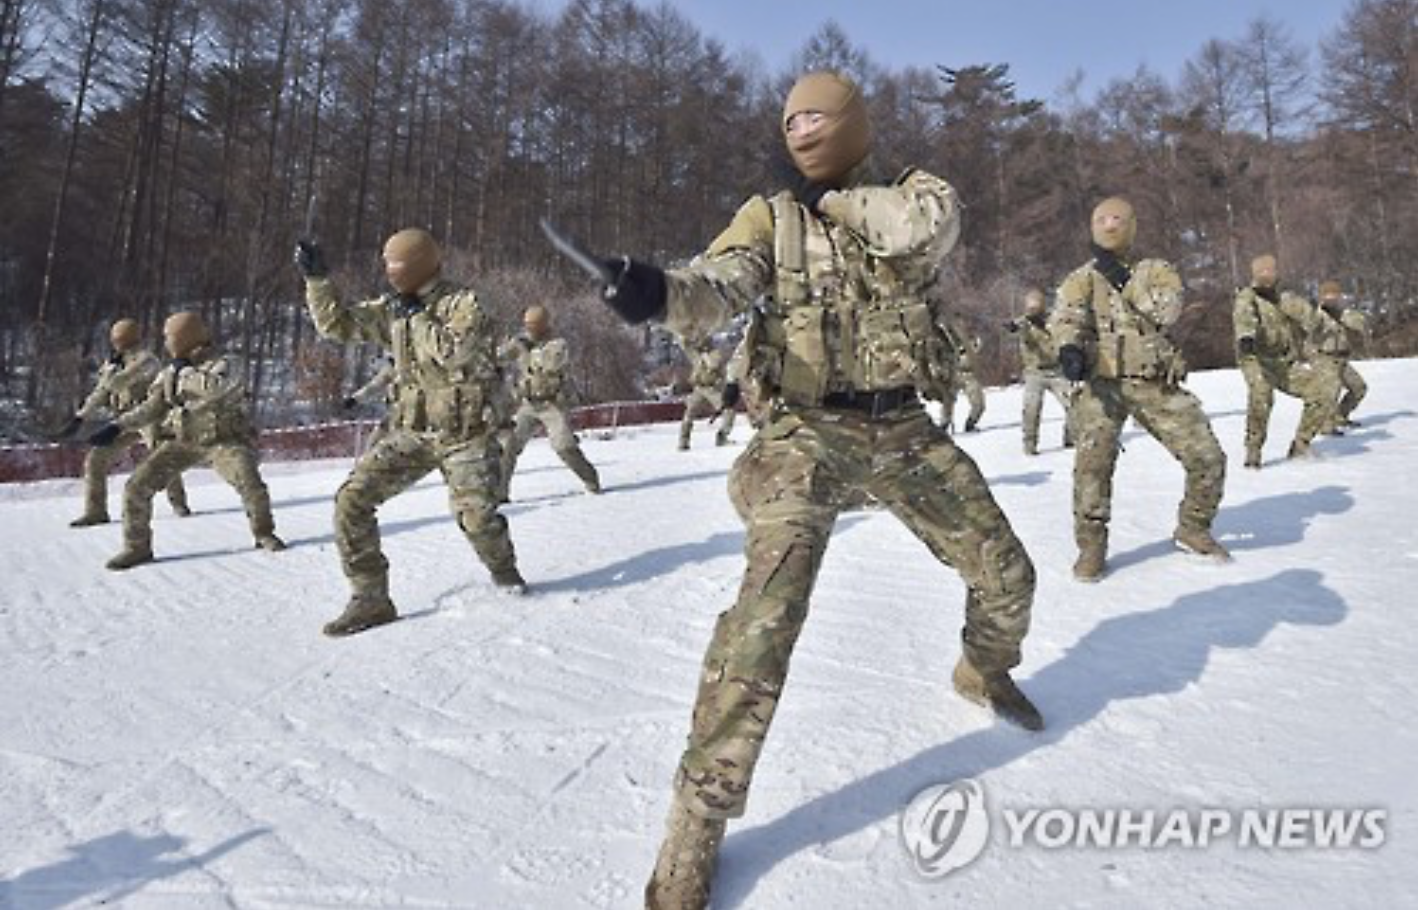 South Korean Special Forces Knife Training